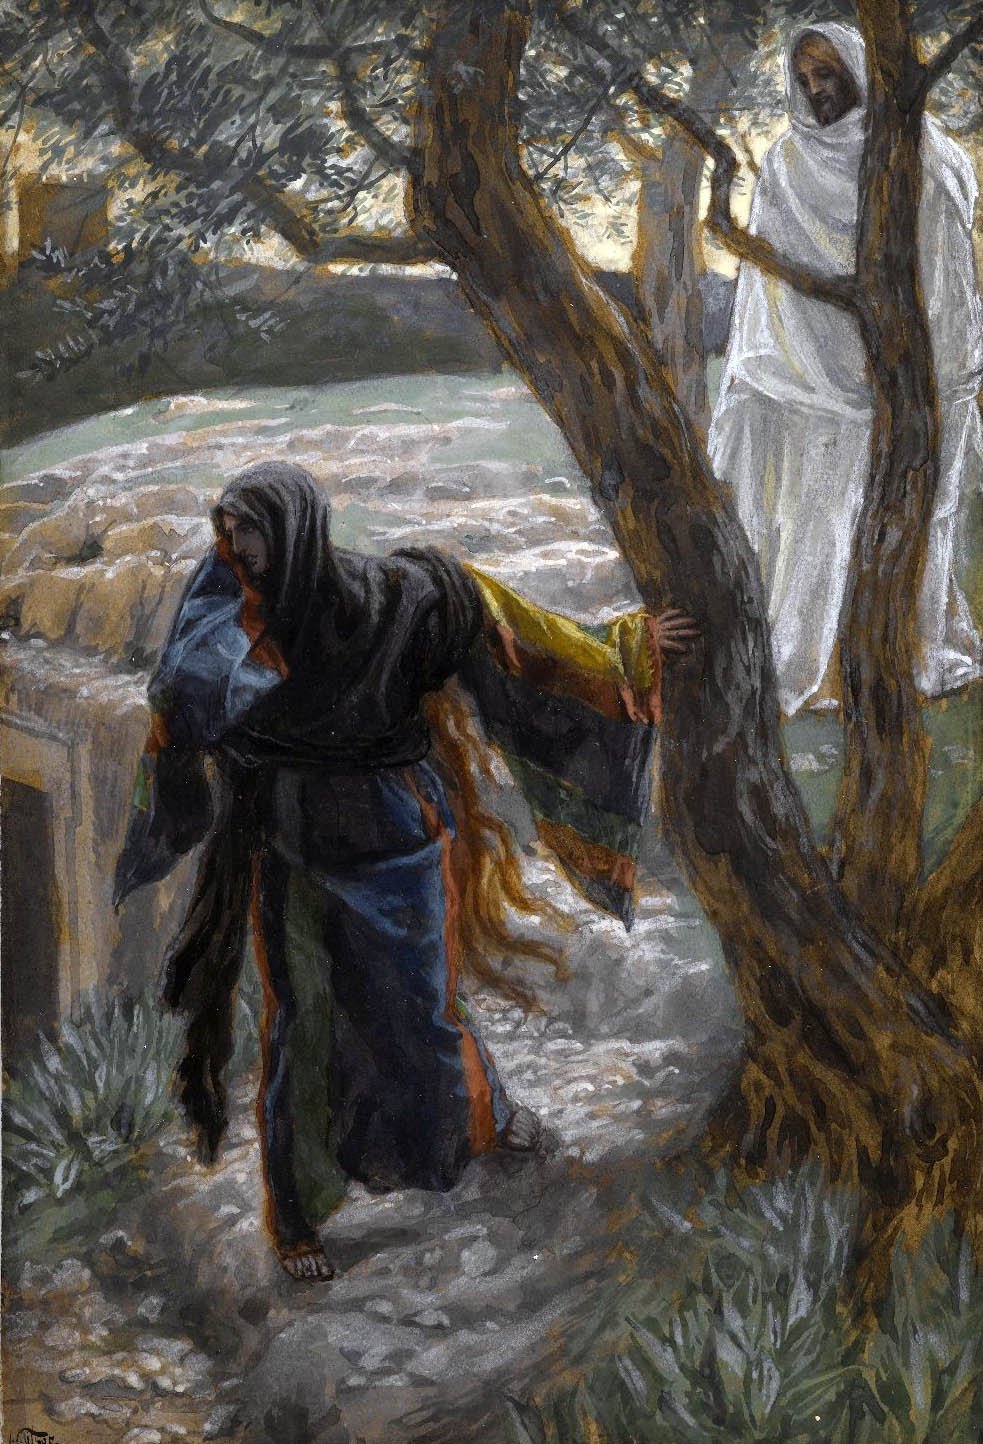 Jesus appears to Mary Magdalene 00.159.334_PS2.jpg